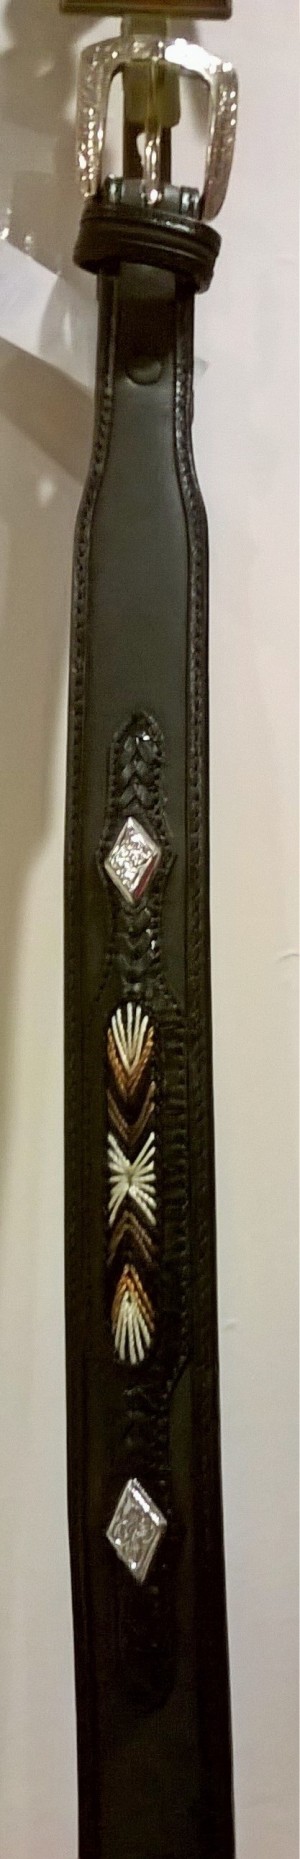 Western Belt, Leather with silver co chonchos and embriodary